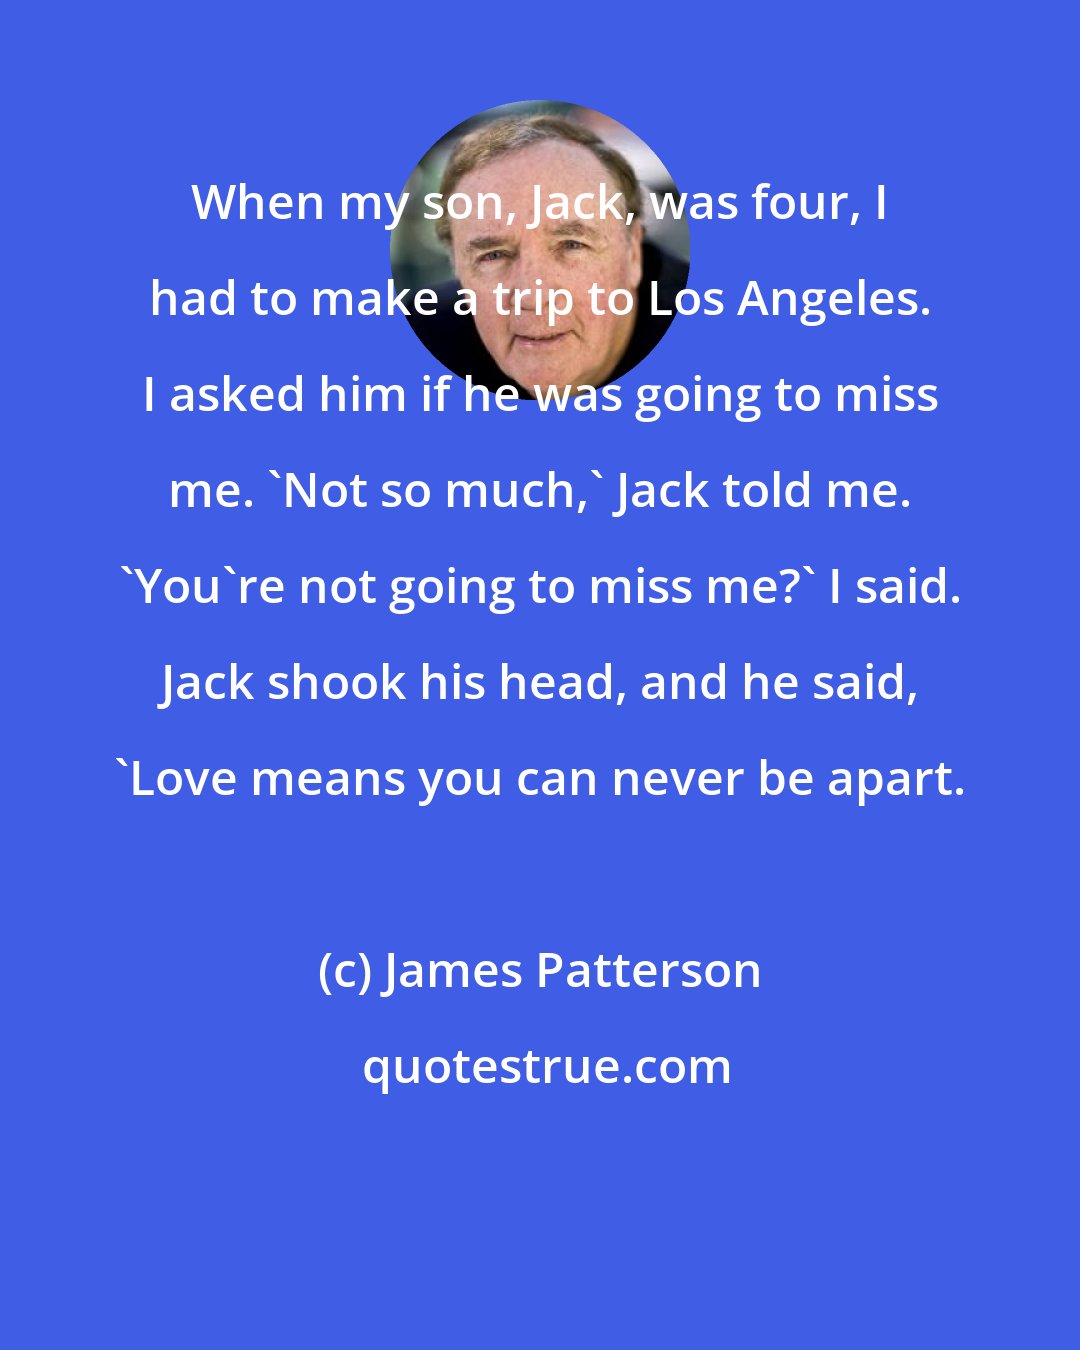 James Patterson: When my son, Jack, was four, I had to make a trip to Los Angeles. I asked him if he was going to miss me. 'Not so much,' Jack told me. 'You're not going to miss me?' I said. Jack shook his head, and he said, 'Love means you can never be apart.